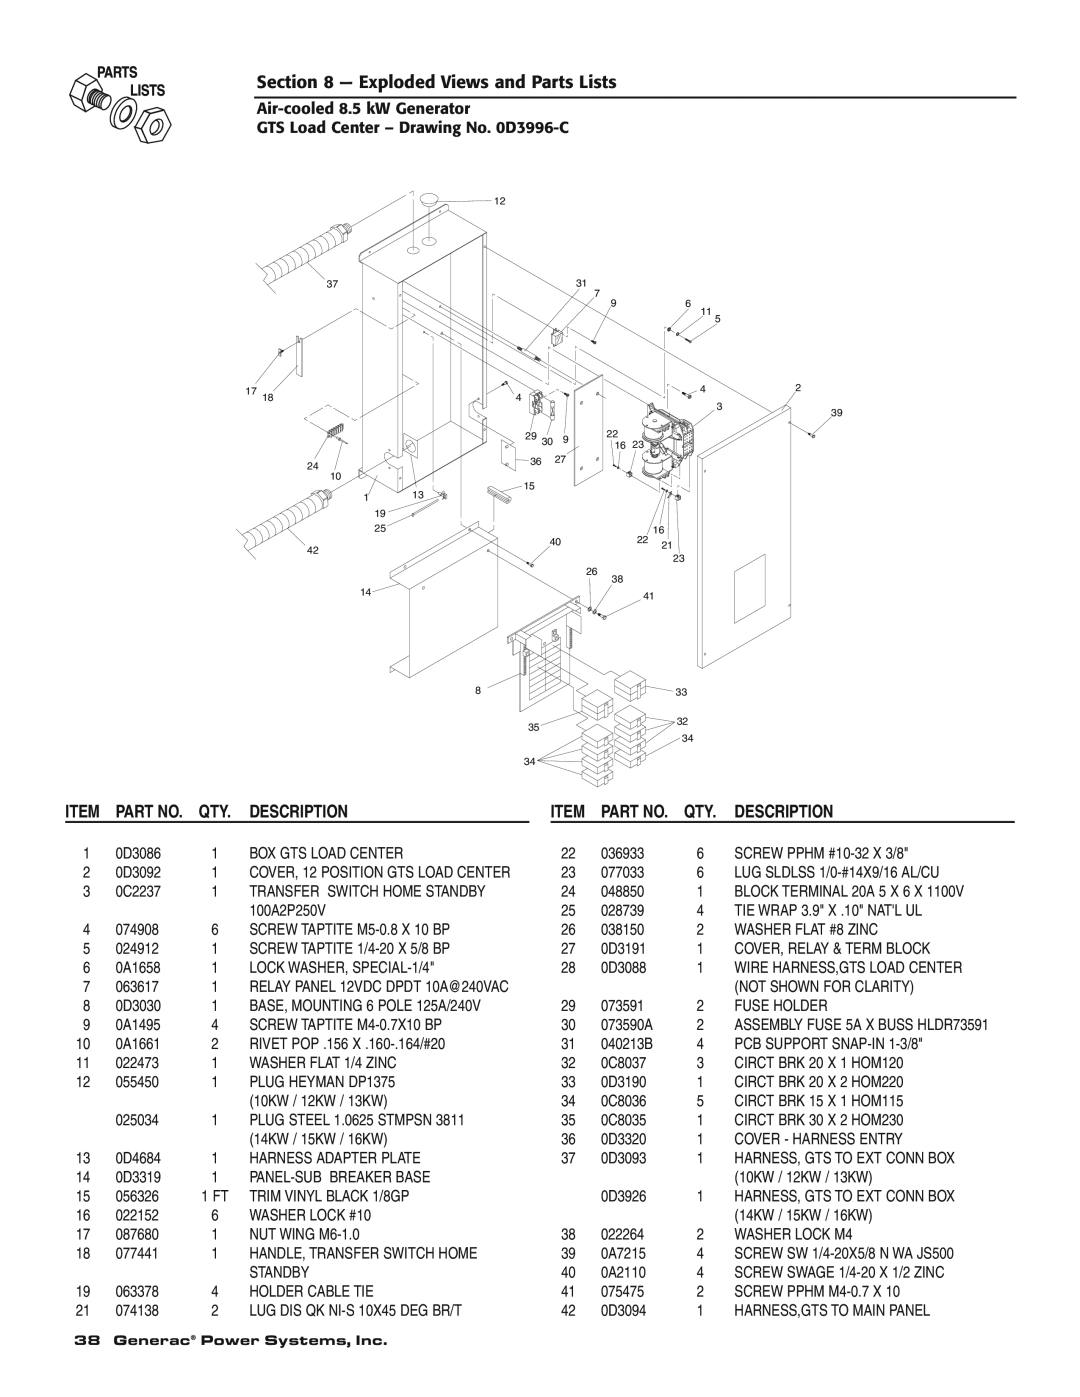 Generac 004692-0 owner manual Exploded Views and Parts Lists, Part No, Description 